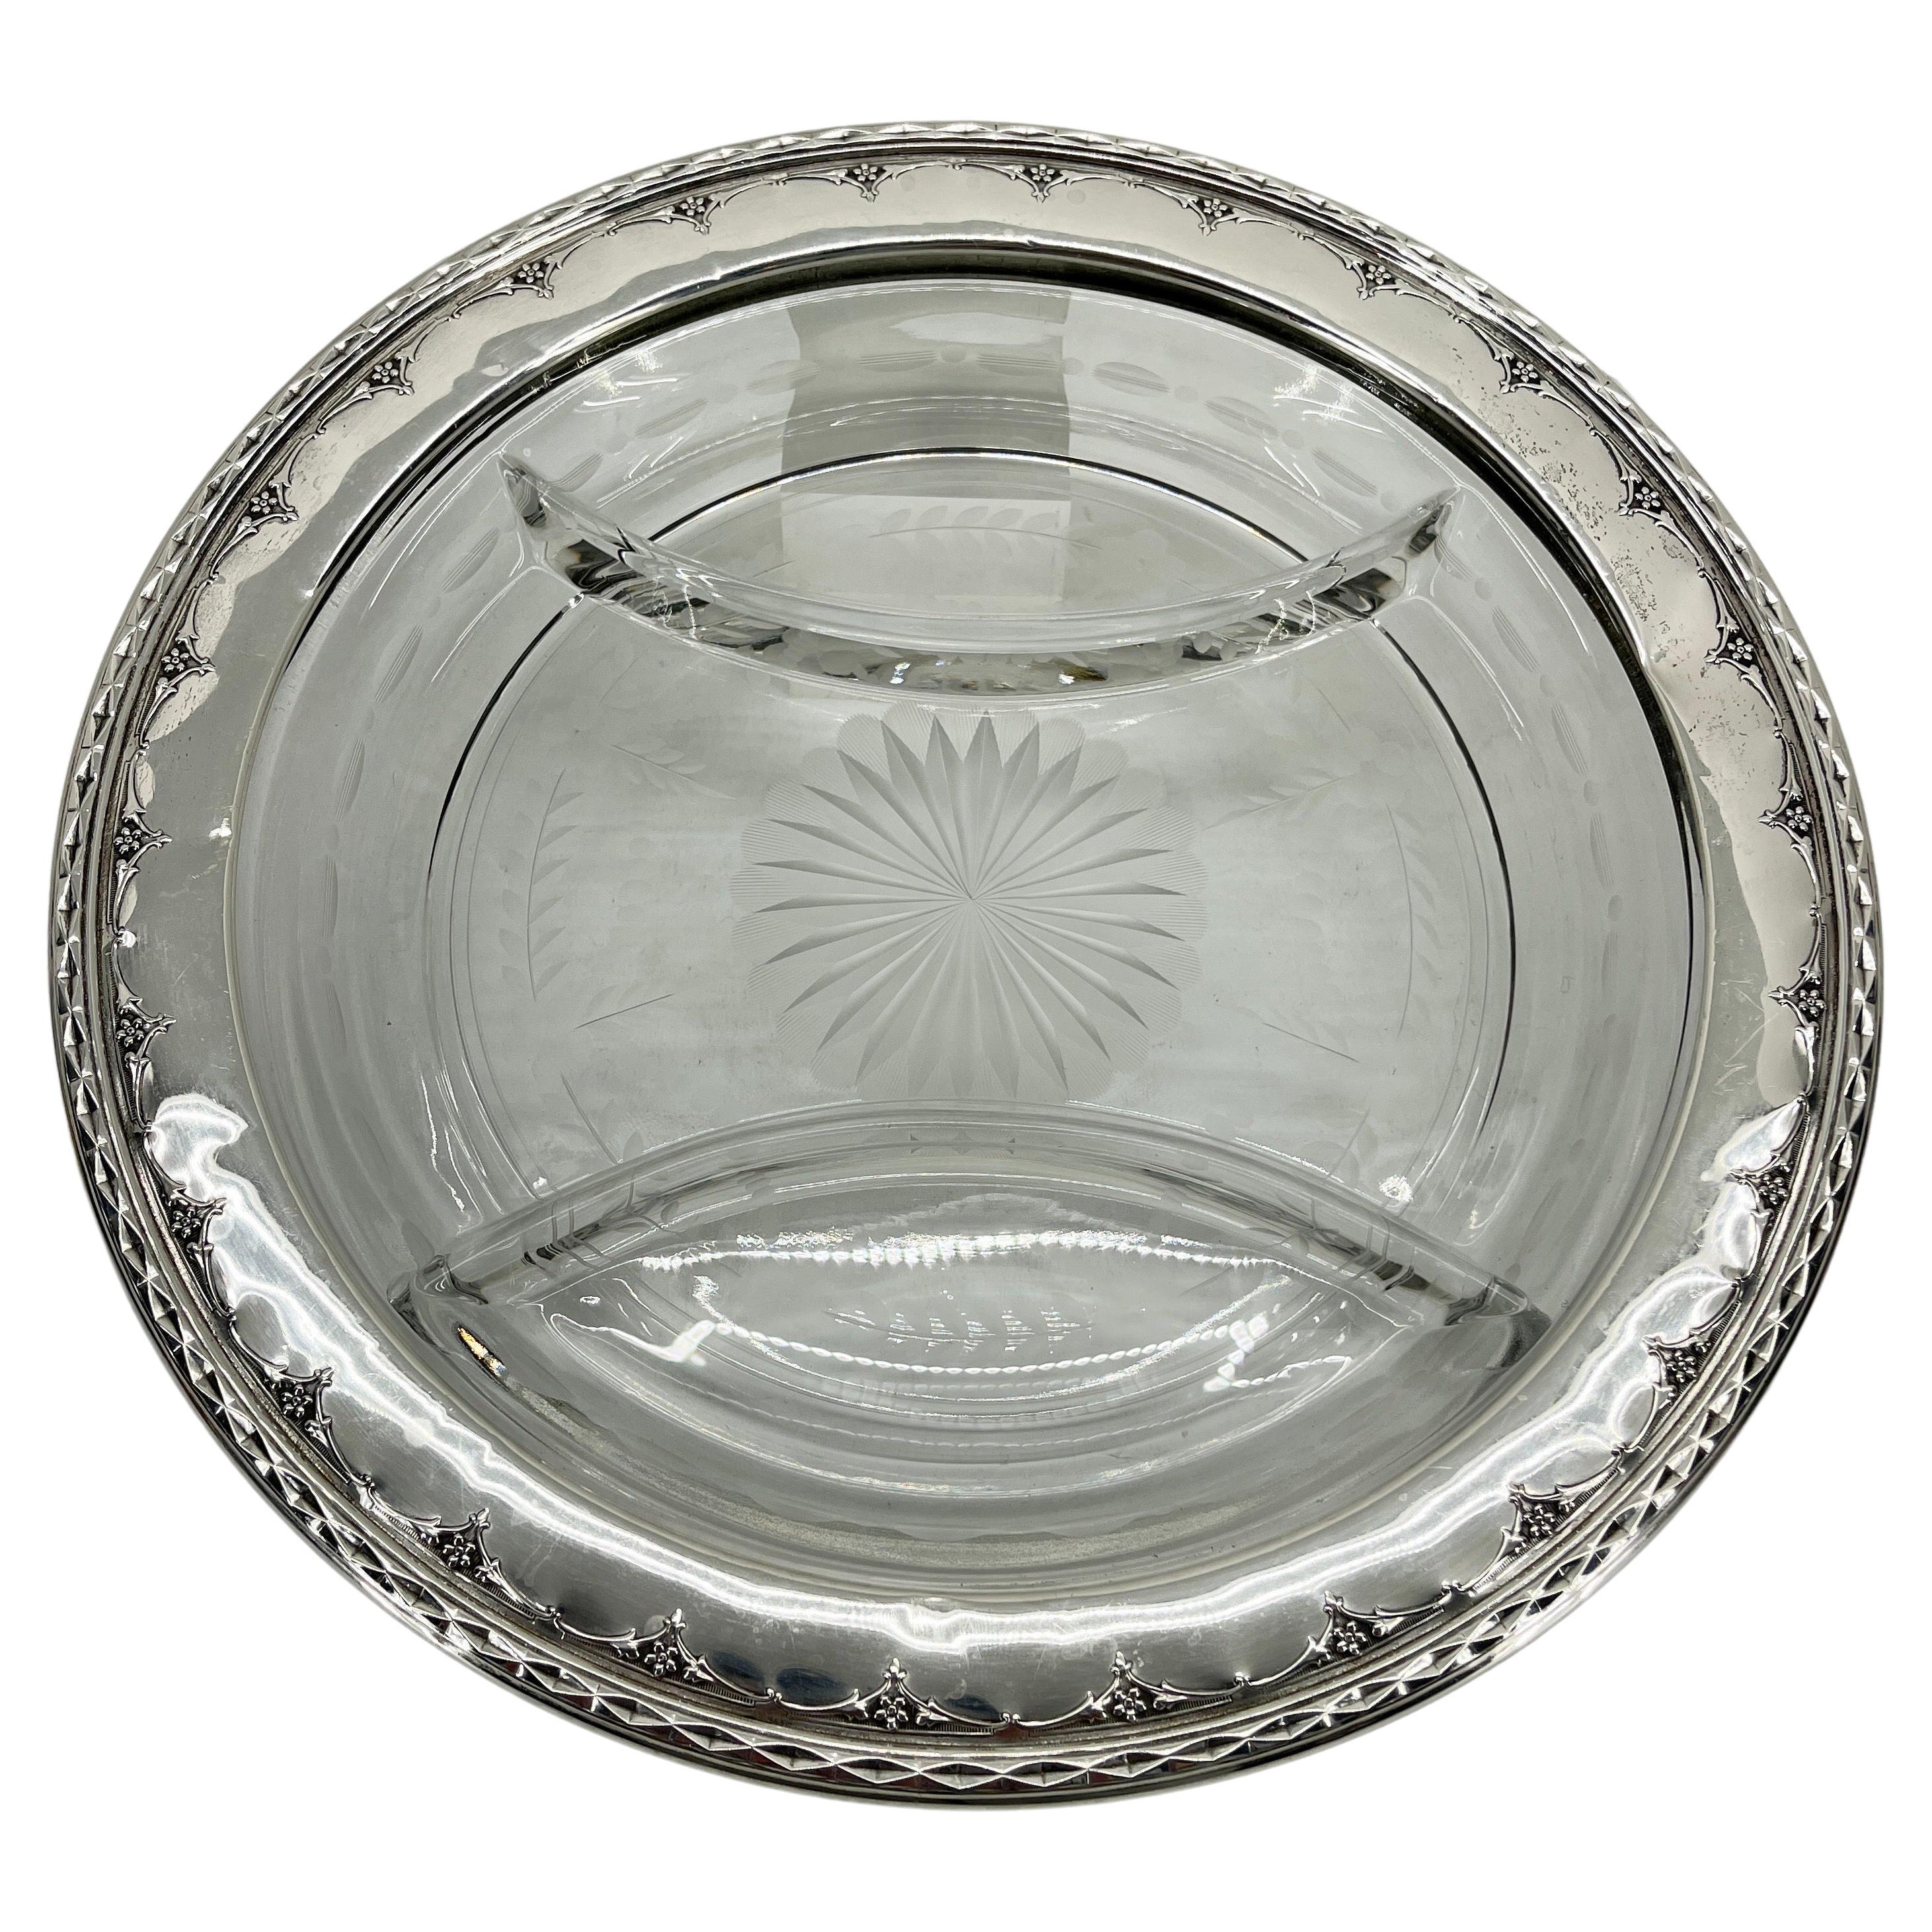 Neoclassical Sterling Silver and Cut Glass Crudite Tray by Wallace